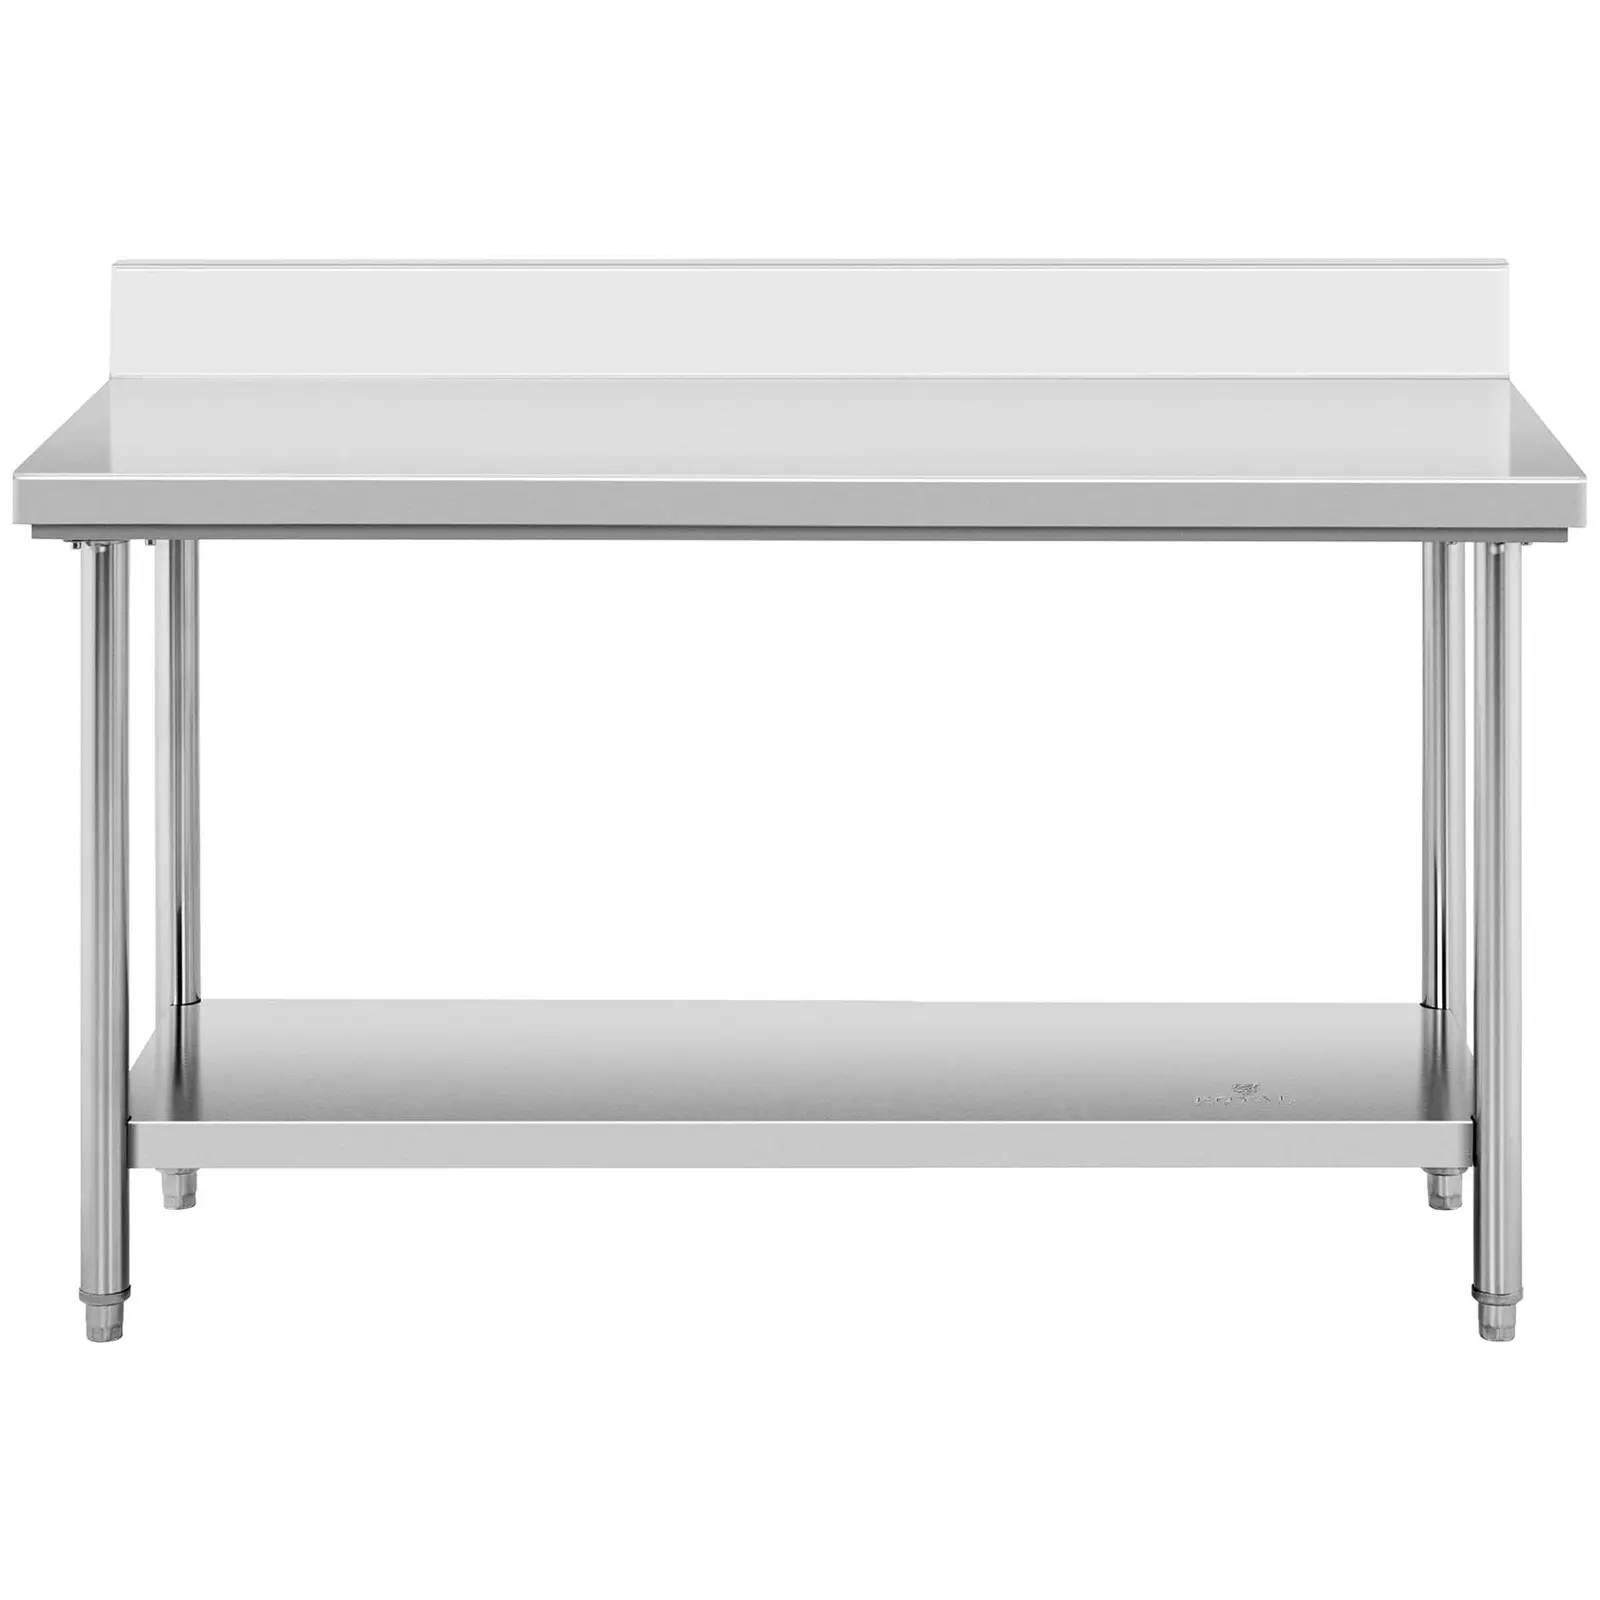 Stainless Steel Work Table - 150 x 60 cm - upstand - 159 kg capacity